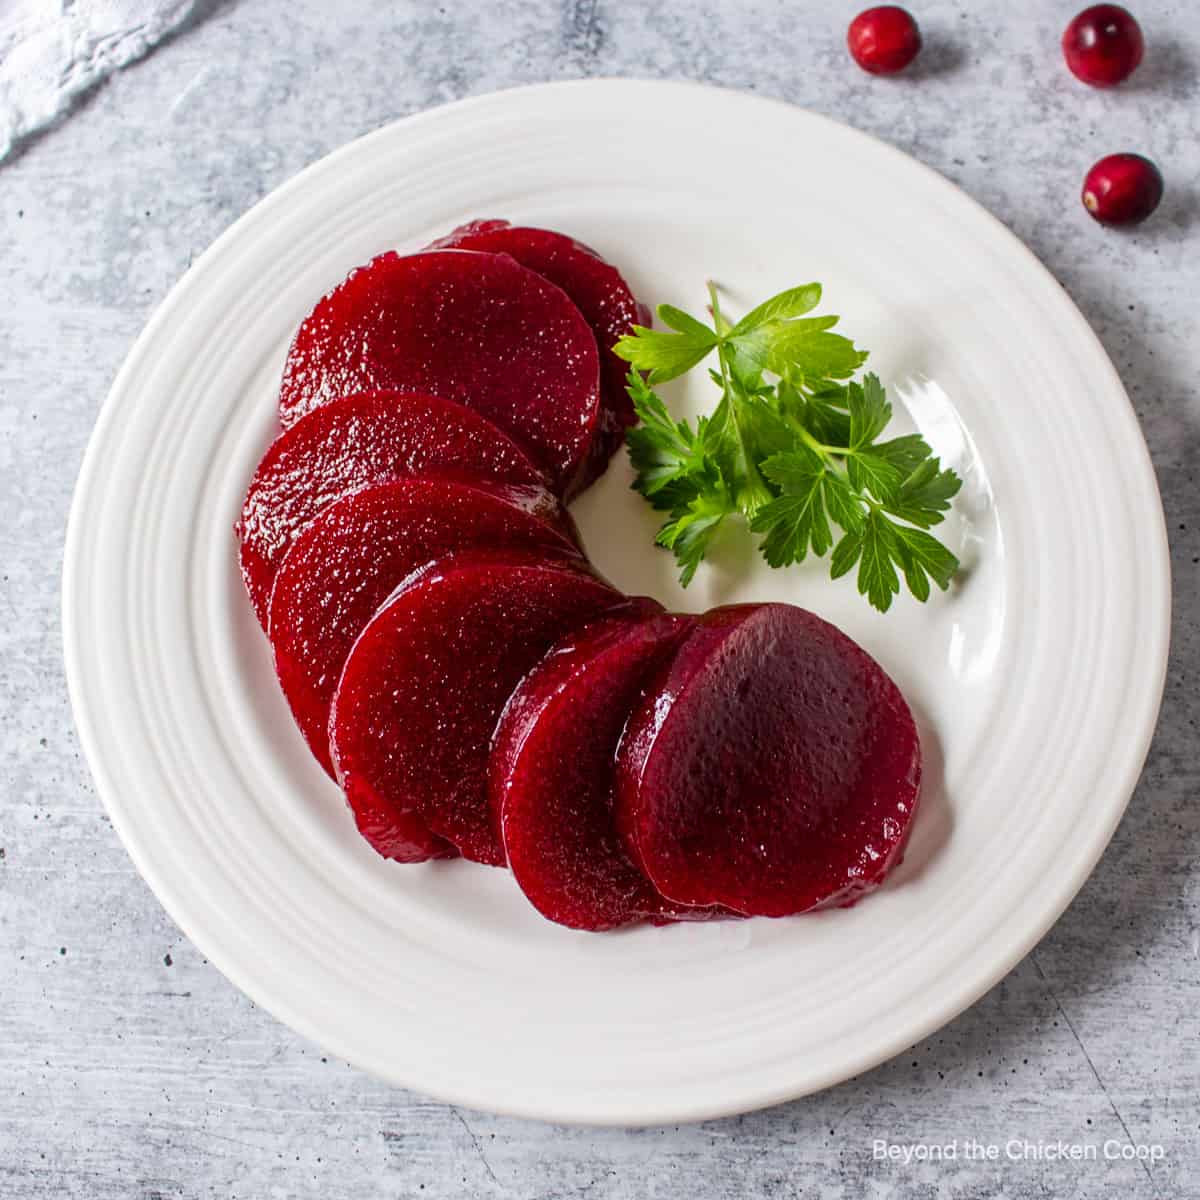 Slices of cranberry sauce with a sprig of parsley.